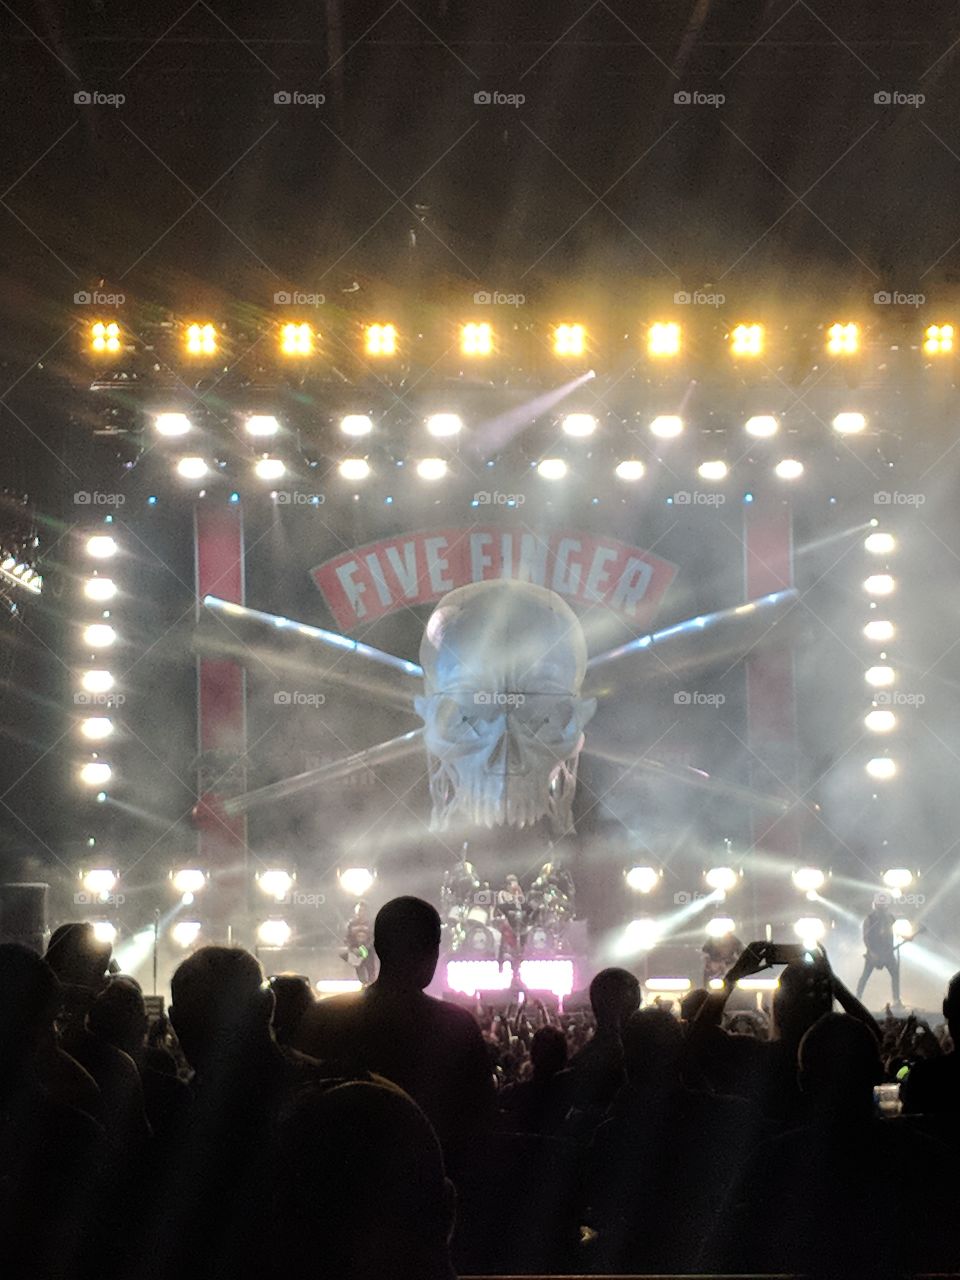 bright white lights cast the stage in a surreal light at the Aug 11, 2018 Five Finger Death Punch concert in Tampa, fl